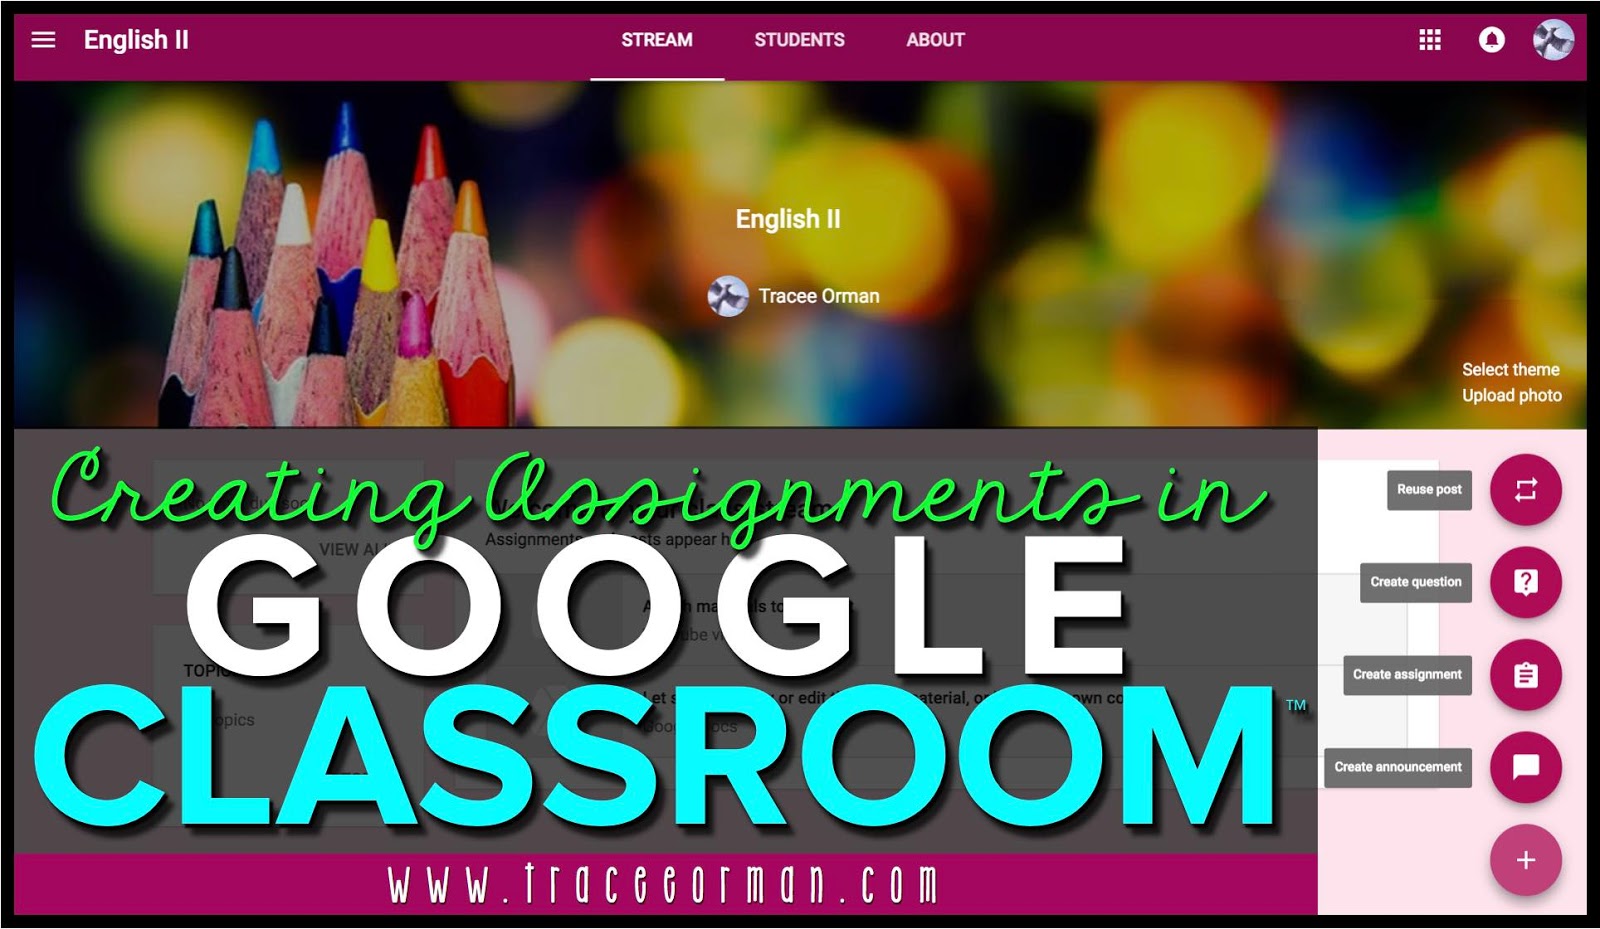 Mrs. Orman's Classroom: Creating Assignments in Google Classroom™